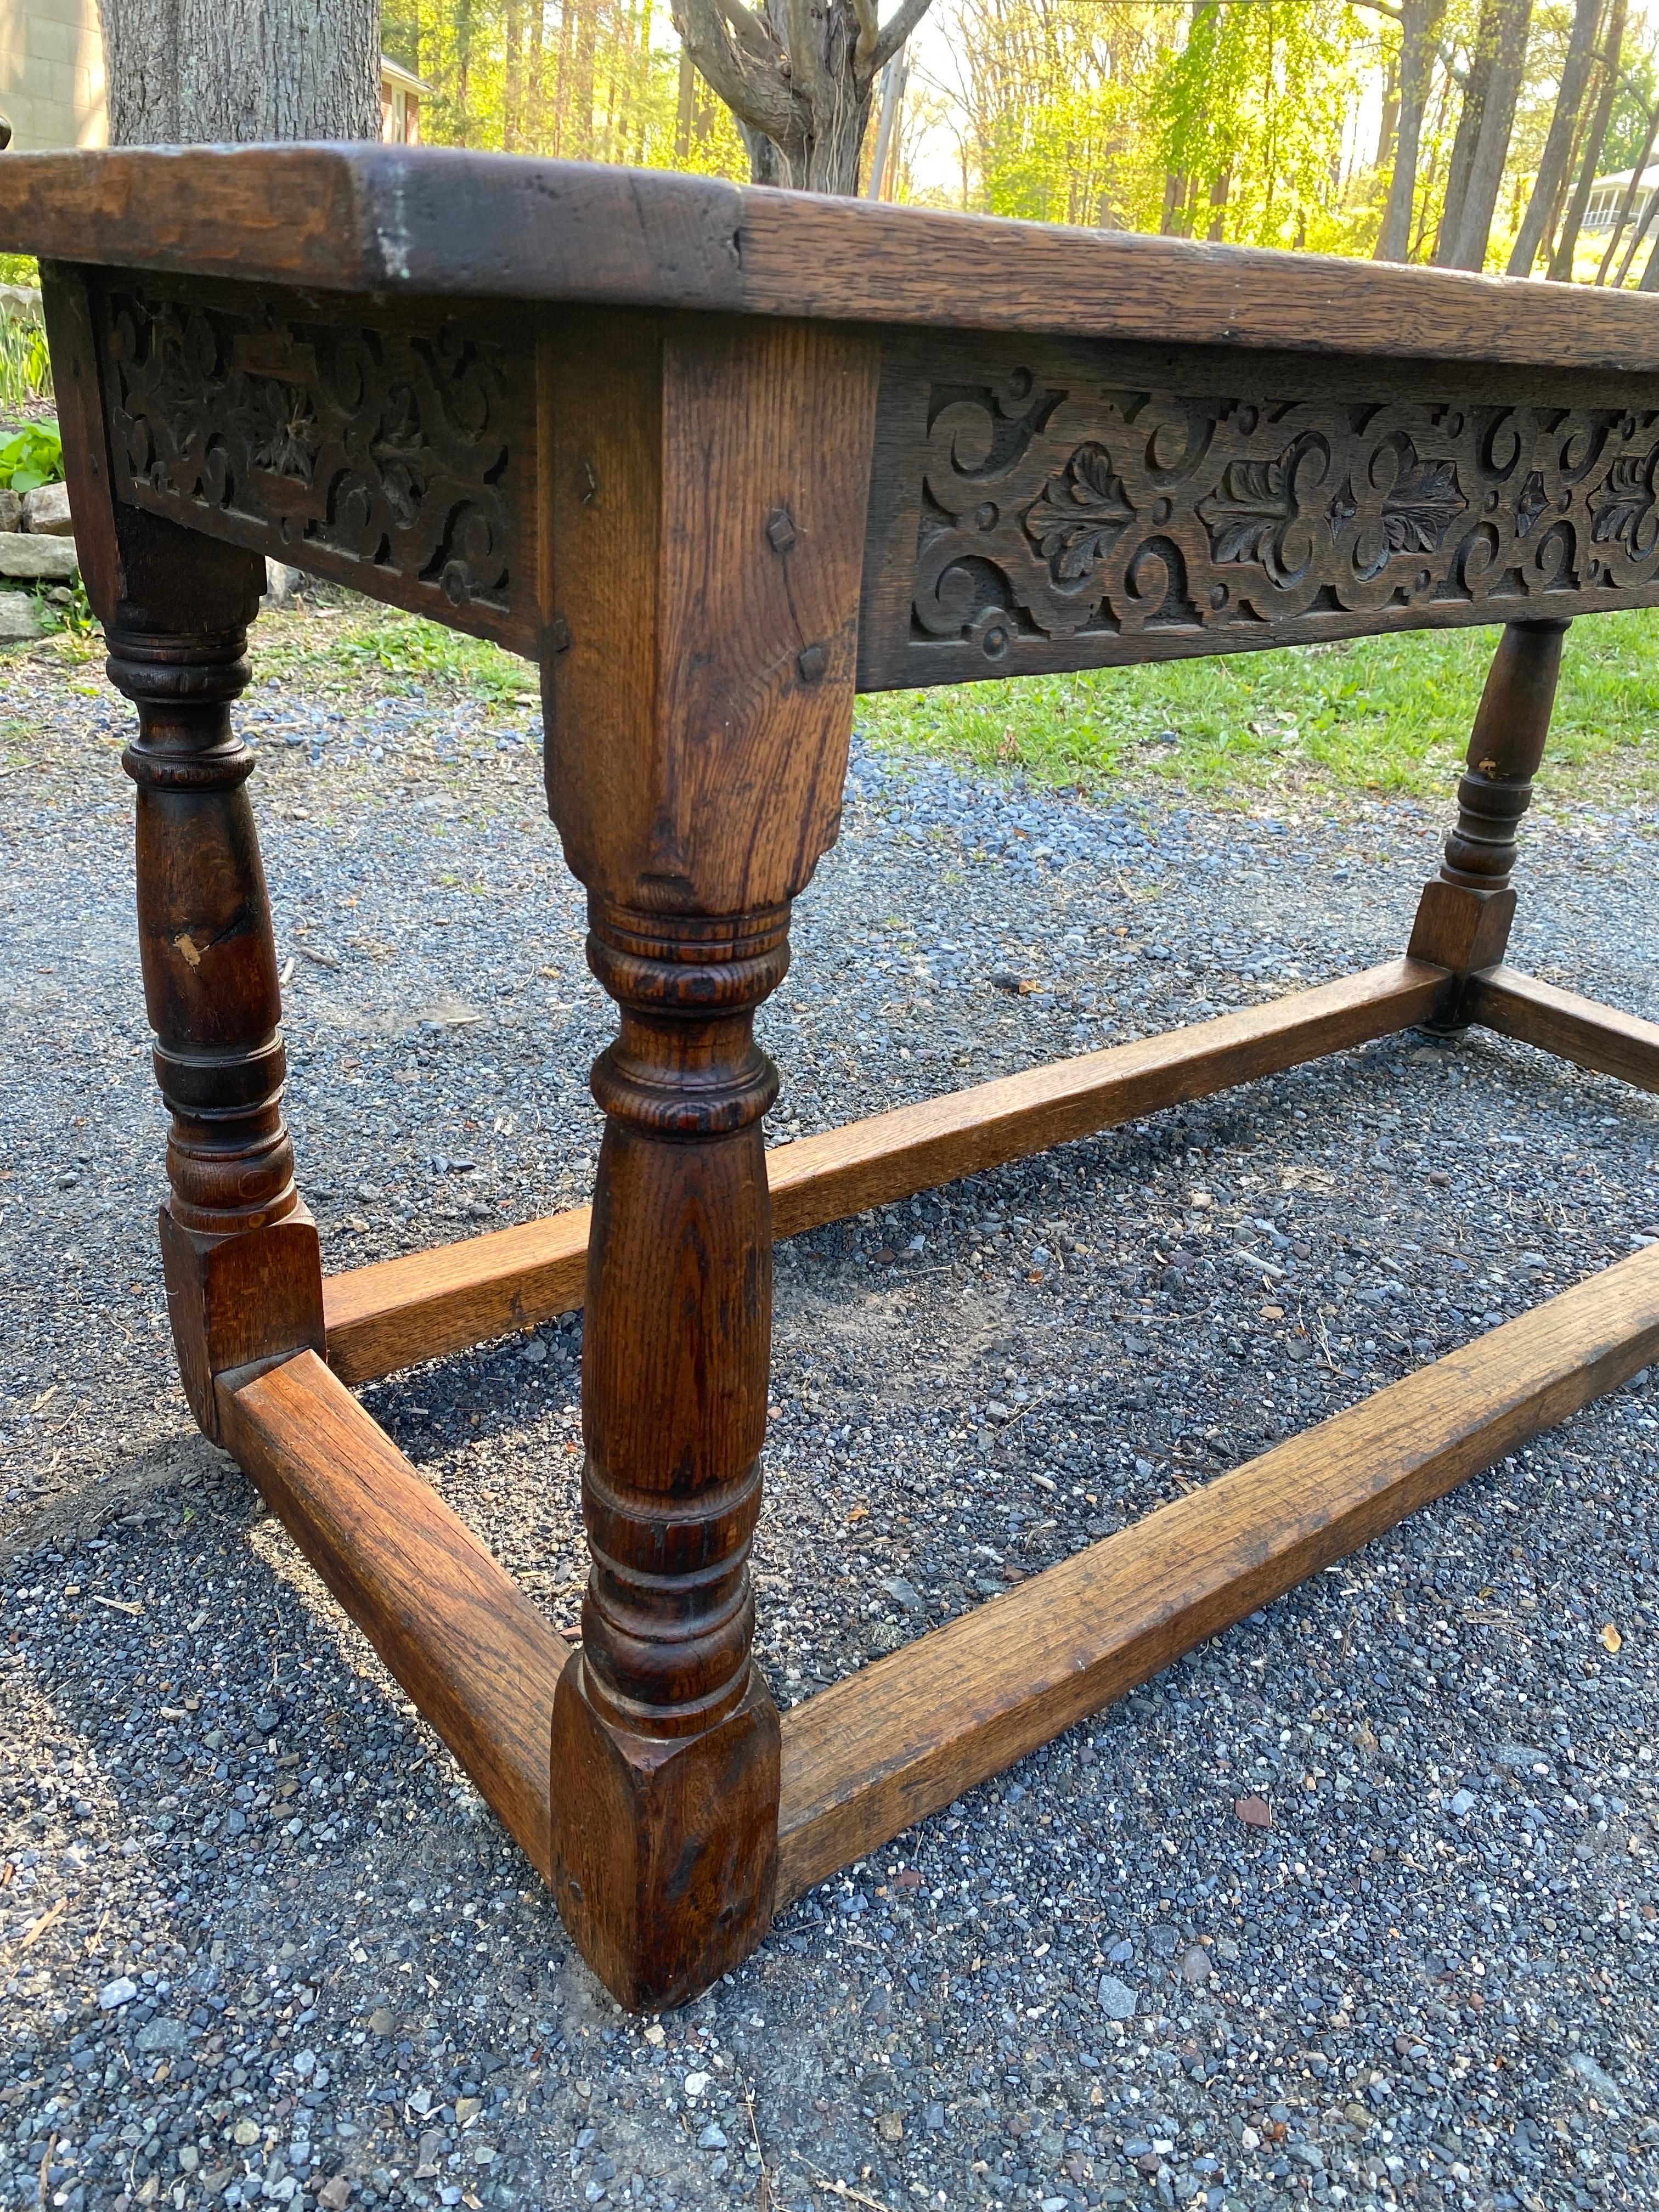 17th century oak refectory table. 3 Plank Top all held together with dowels. Table is solid as a rock! Beautiful signs of use and wear, I'm sure some refinishing has happened over it's last 300 years! Top has beautiful signs of use and wear. Came